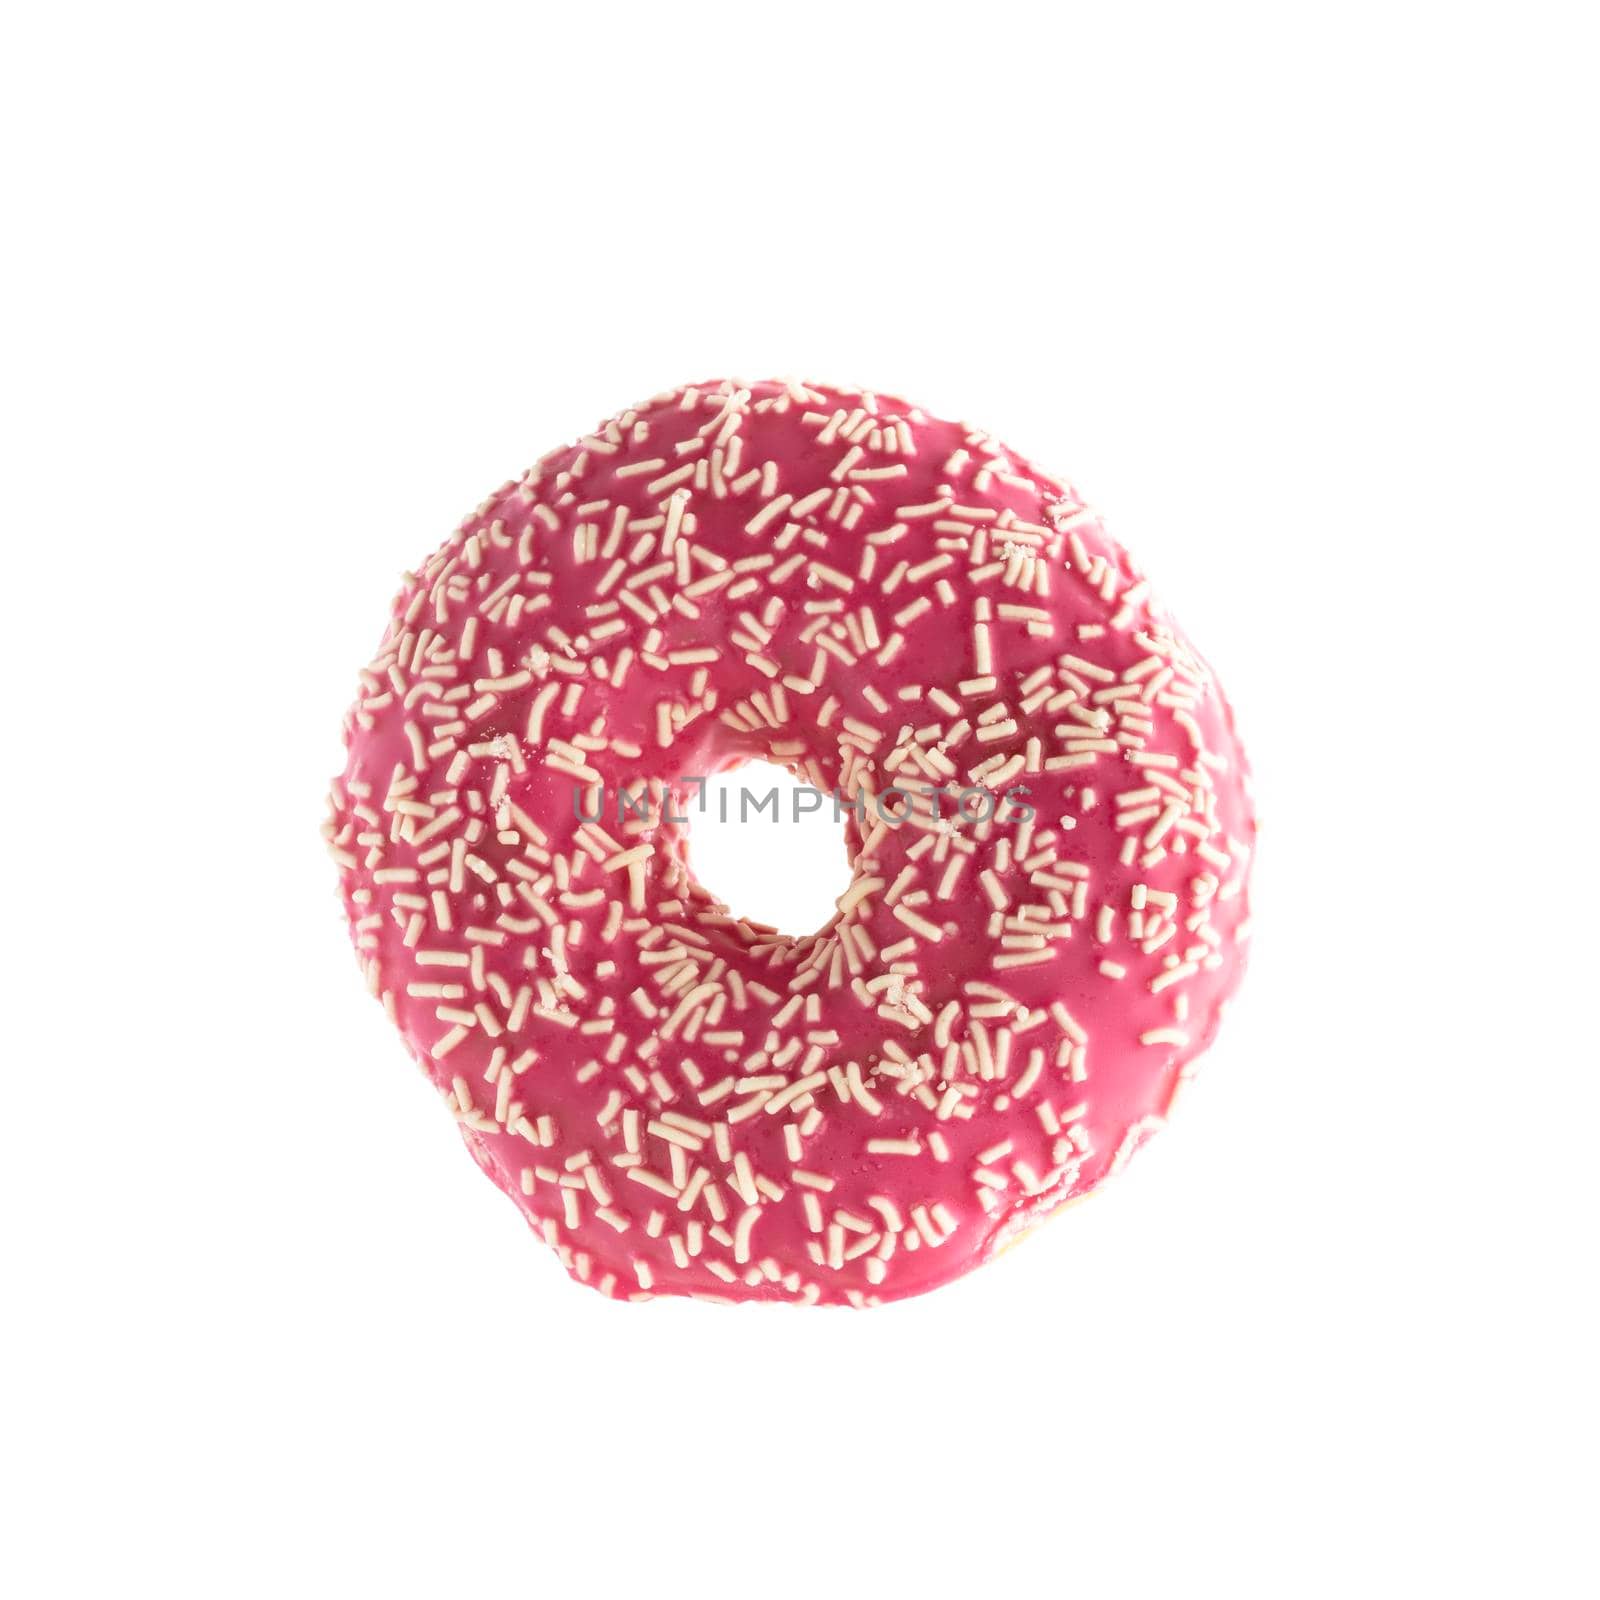 Donut isolated on a white background.